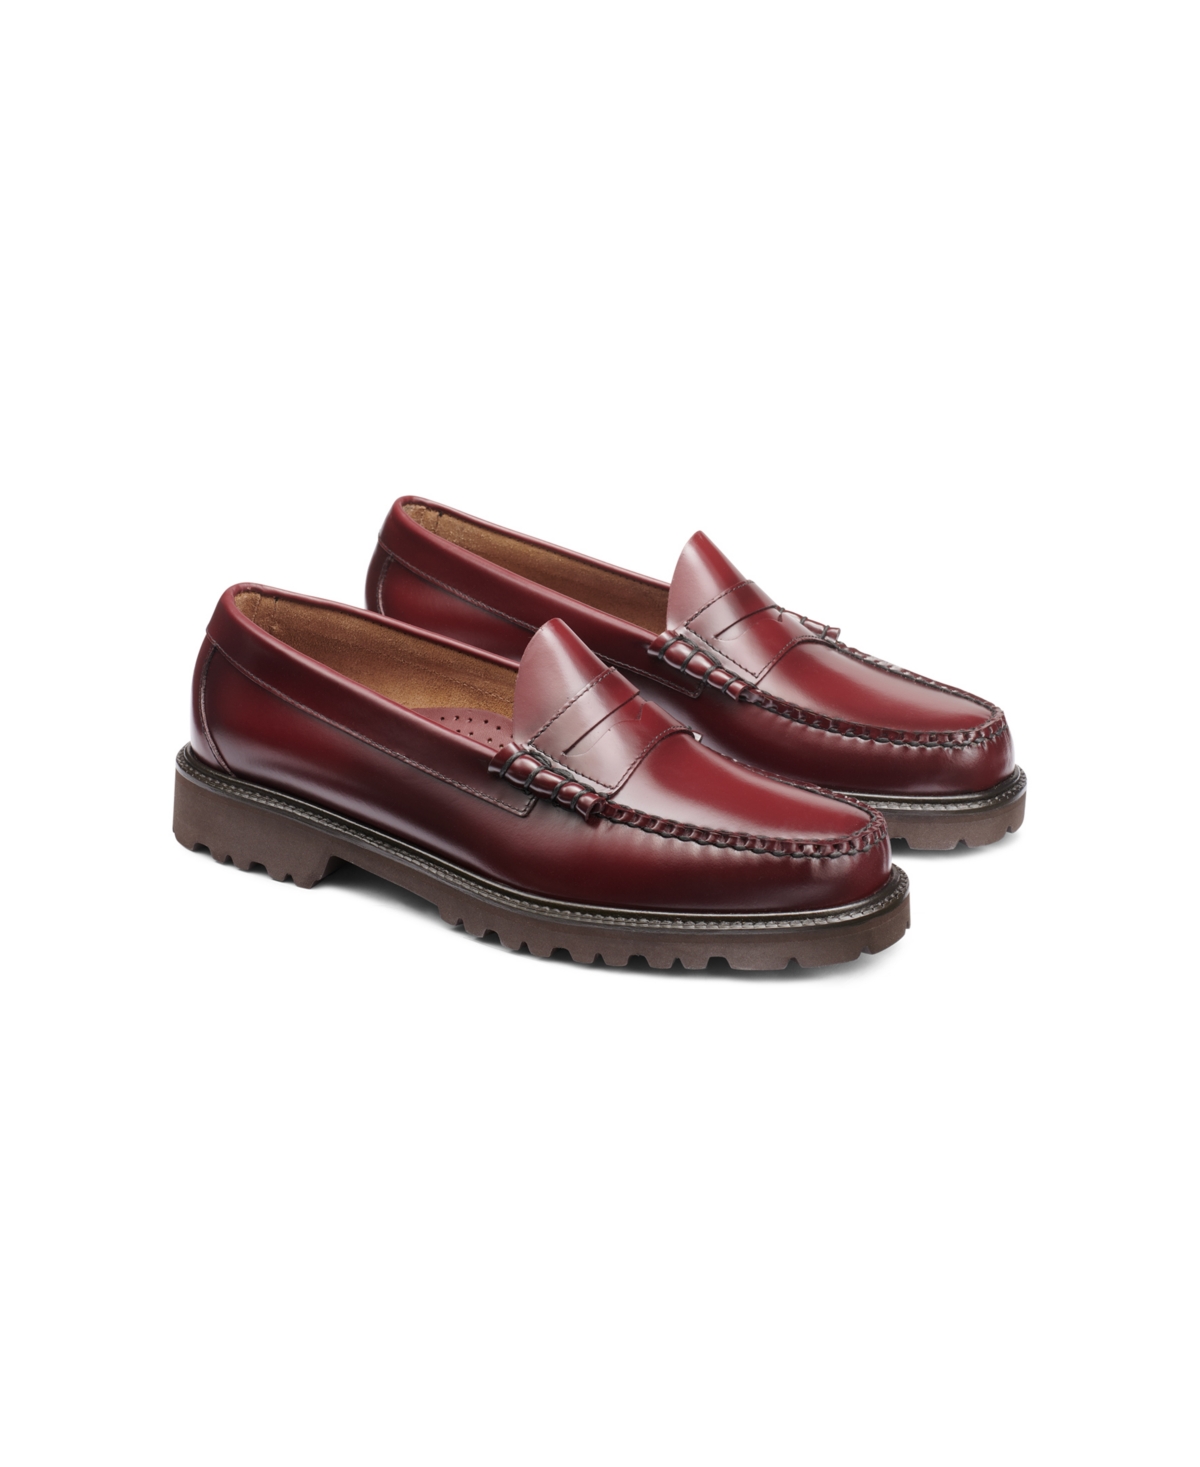 Gh Bass G.h.bass Men's Larson Lug Weejuns Penny Loafers In Wine